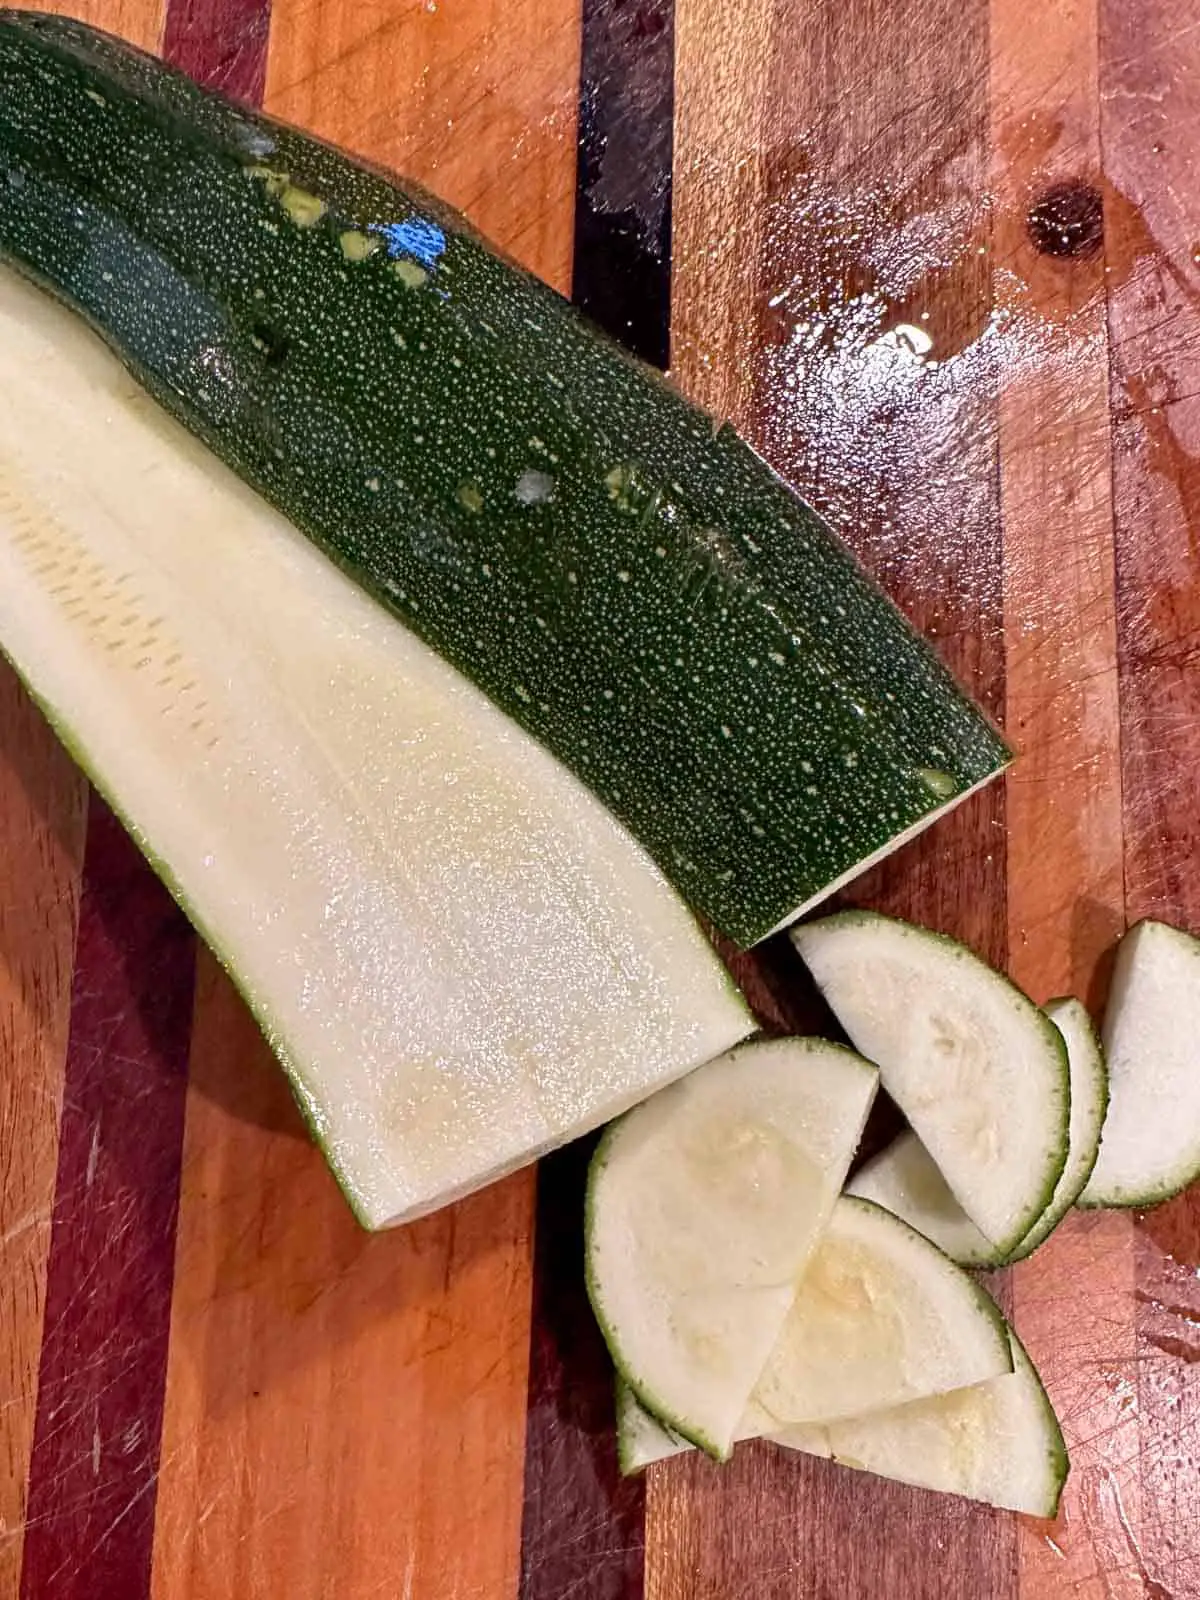 A zucchini on a wooden cutting board which has been sliced down the middle, then a few slices were cut across into half moon shapes.